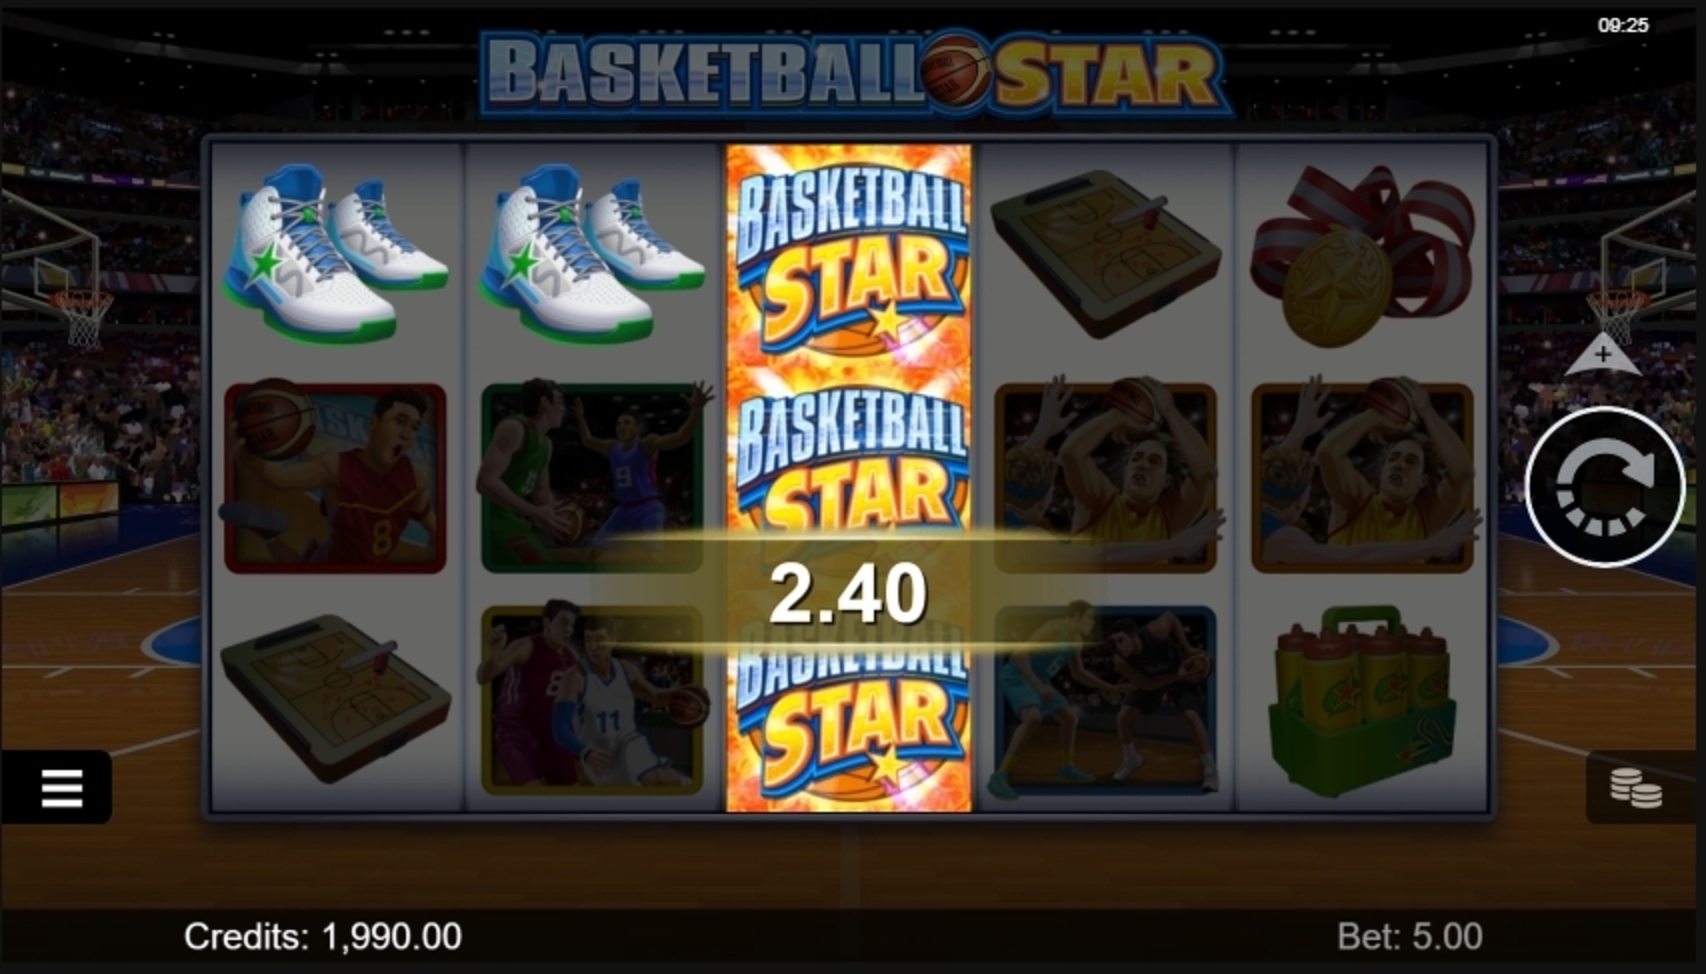 Win Money in Basketball Star Free Slot Game by Microgaming